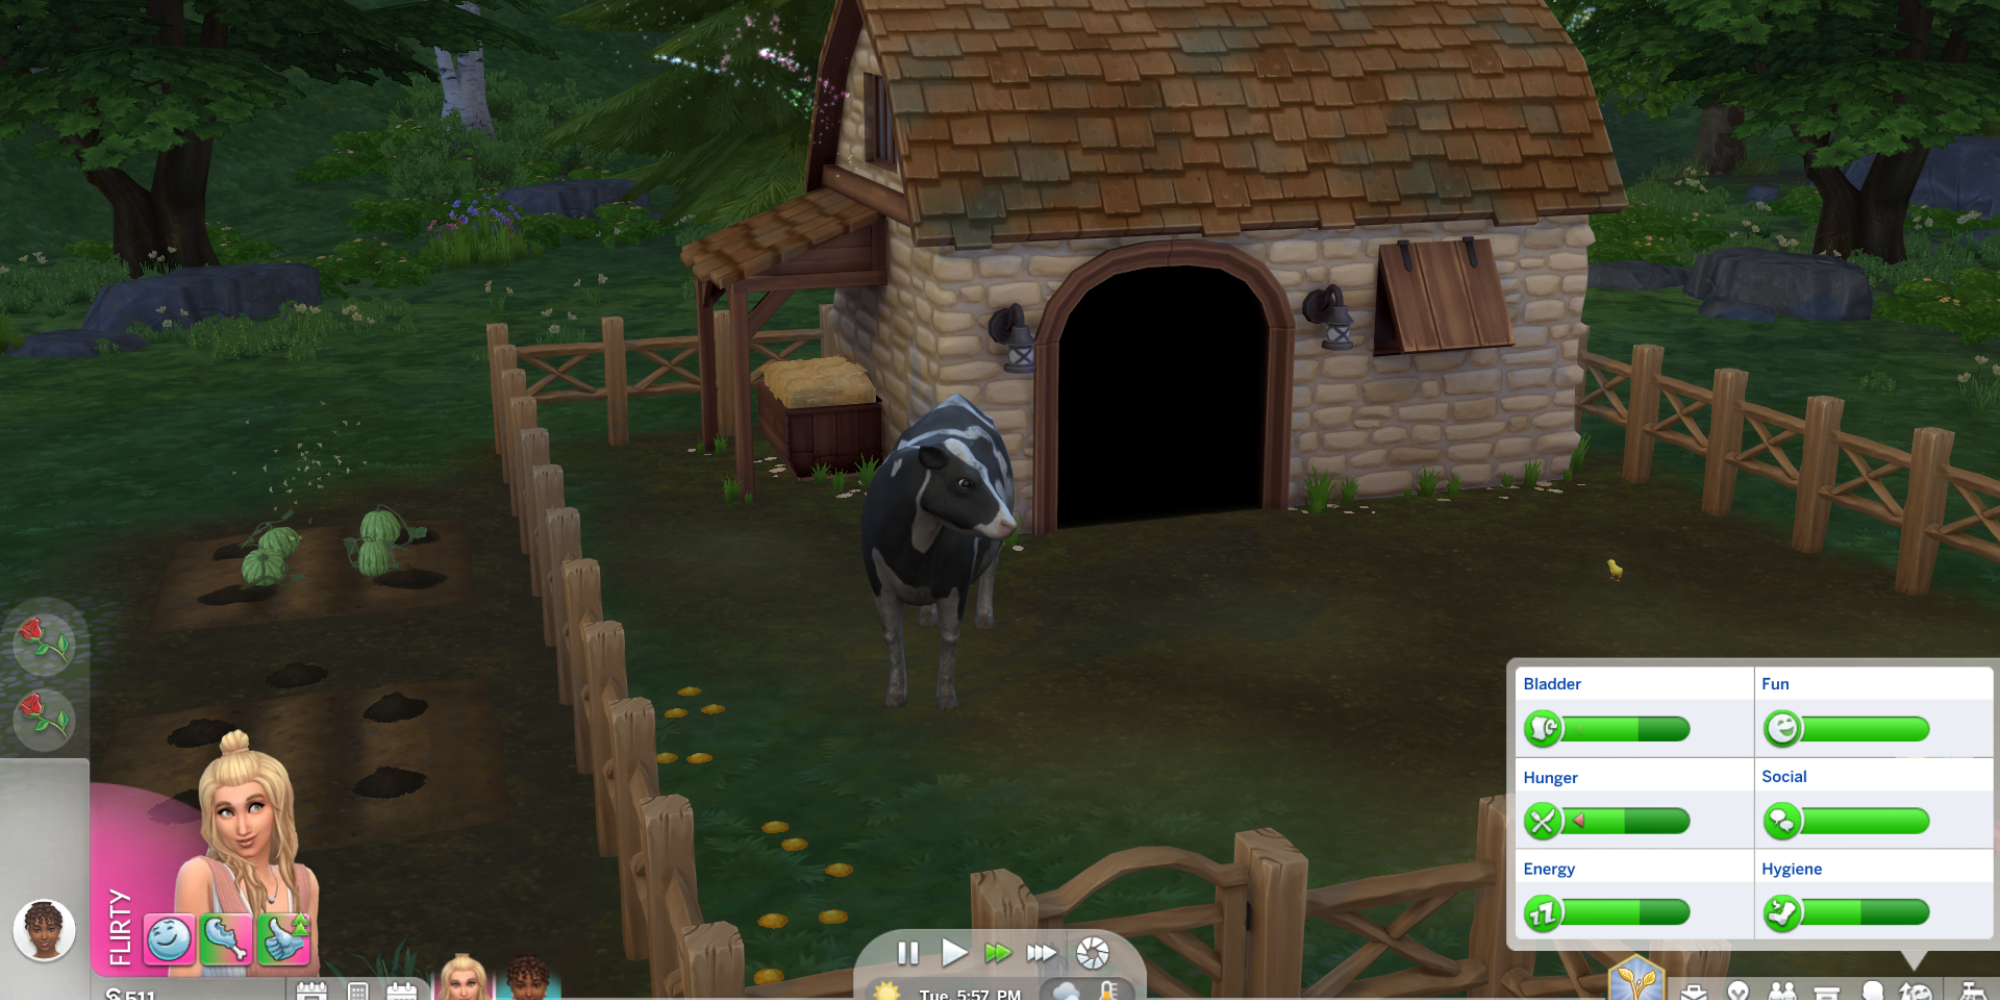 Taking care of a cow in The Sims 4: Cottage Living